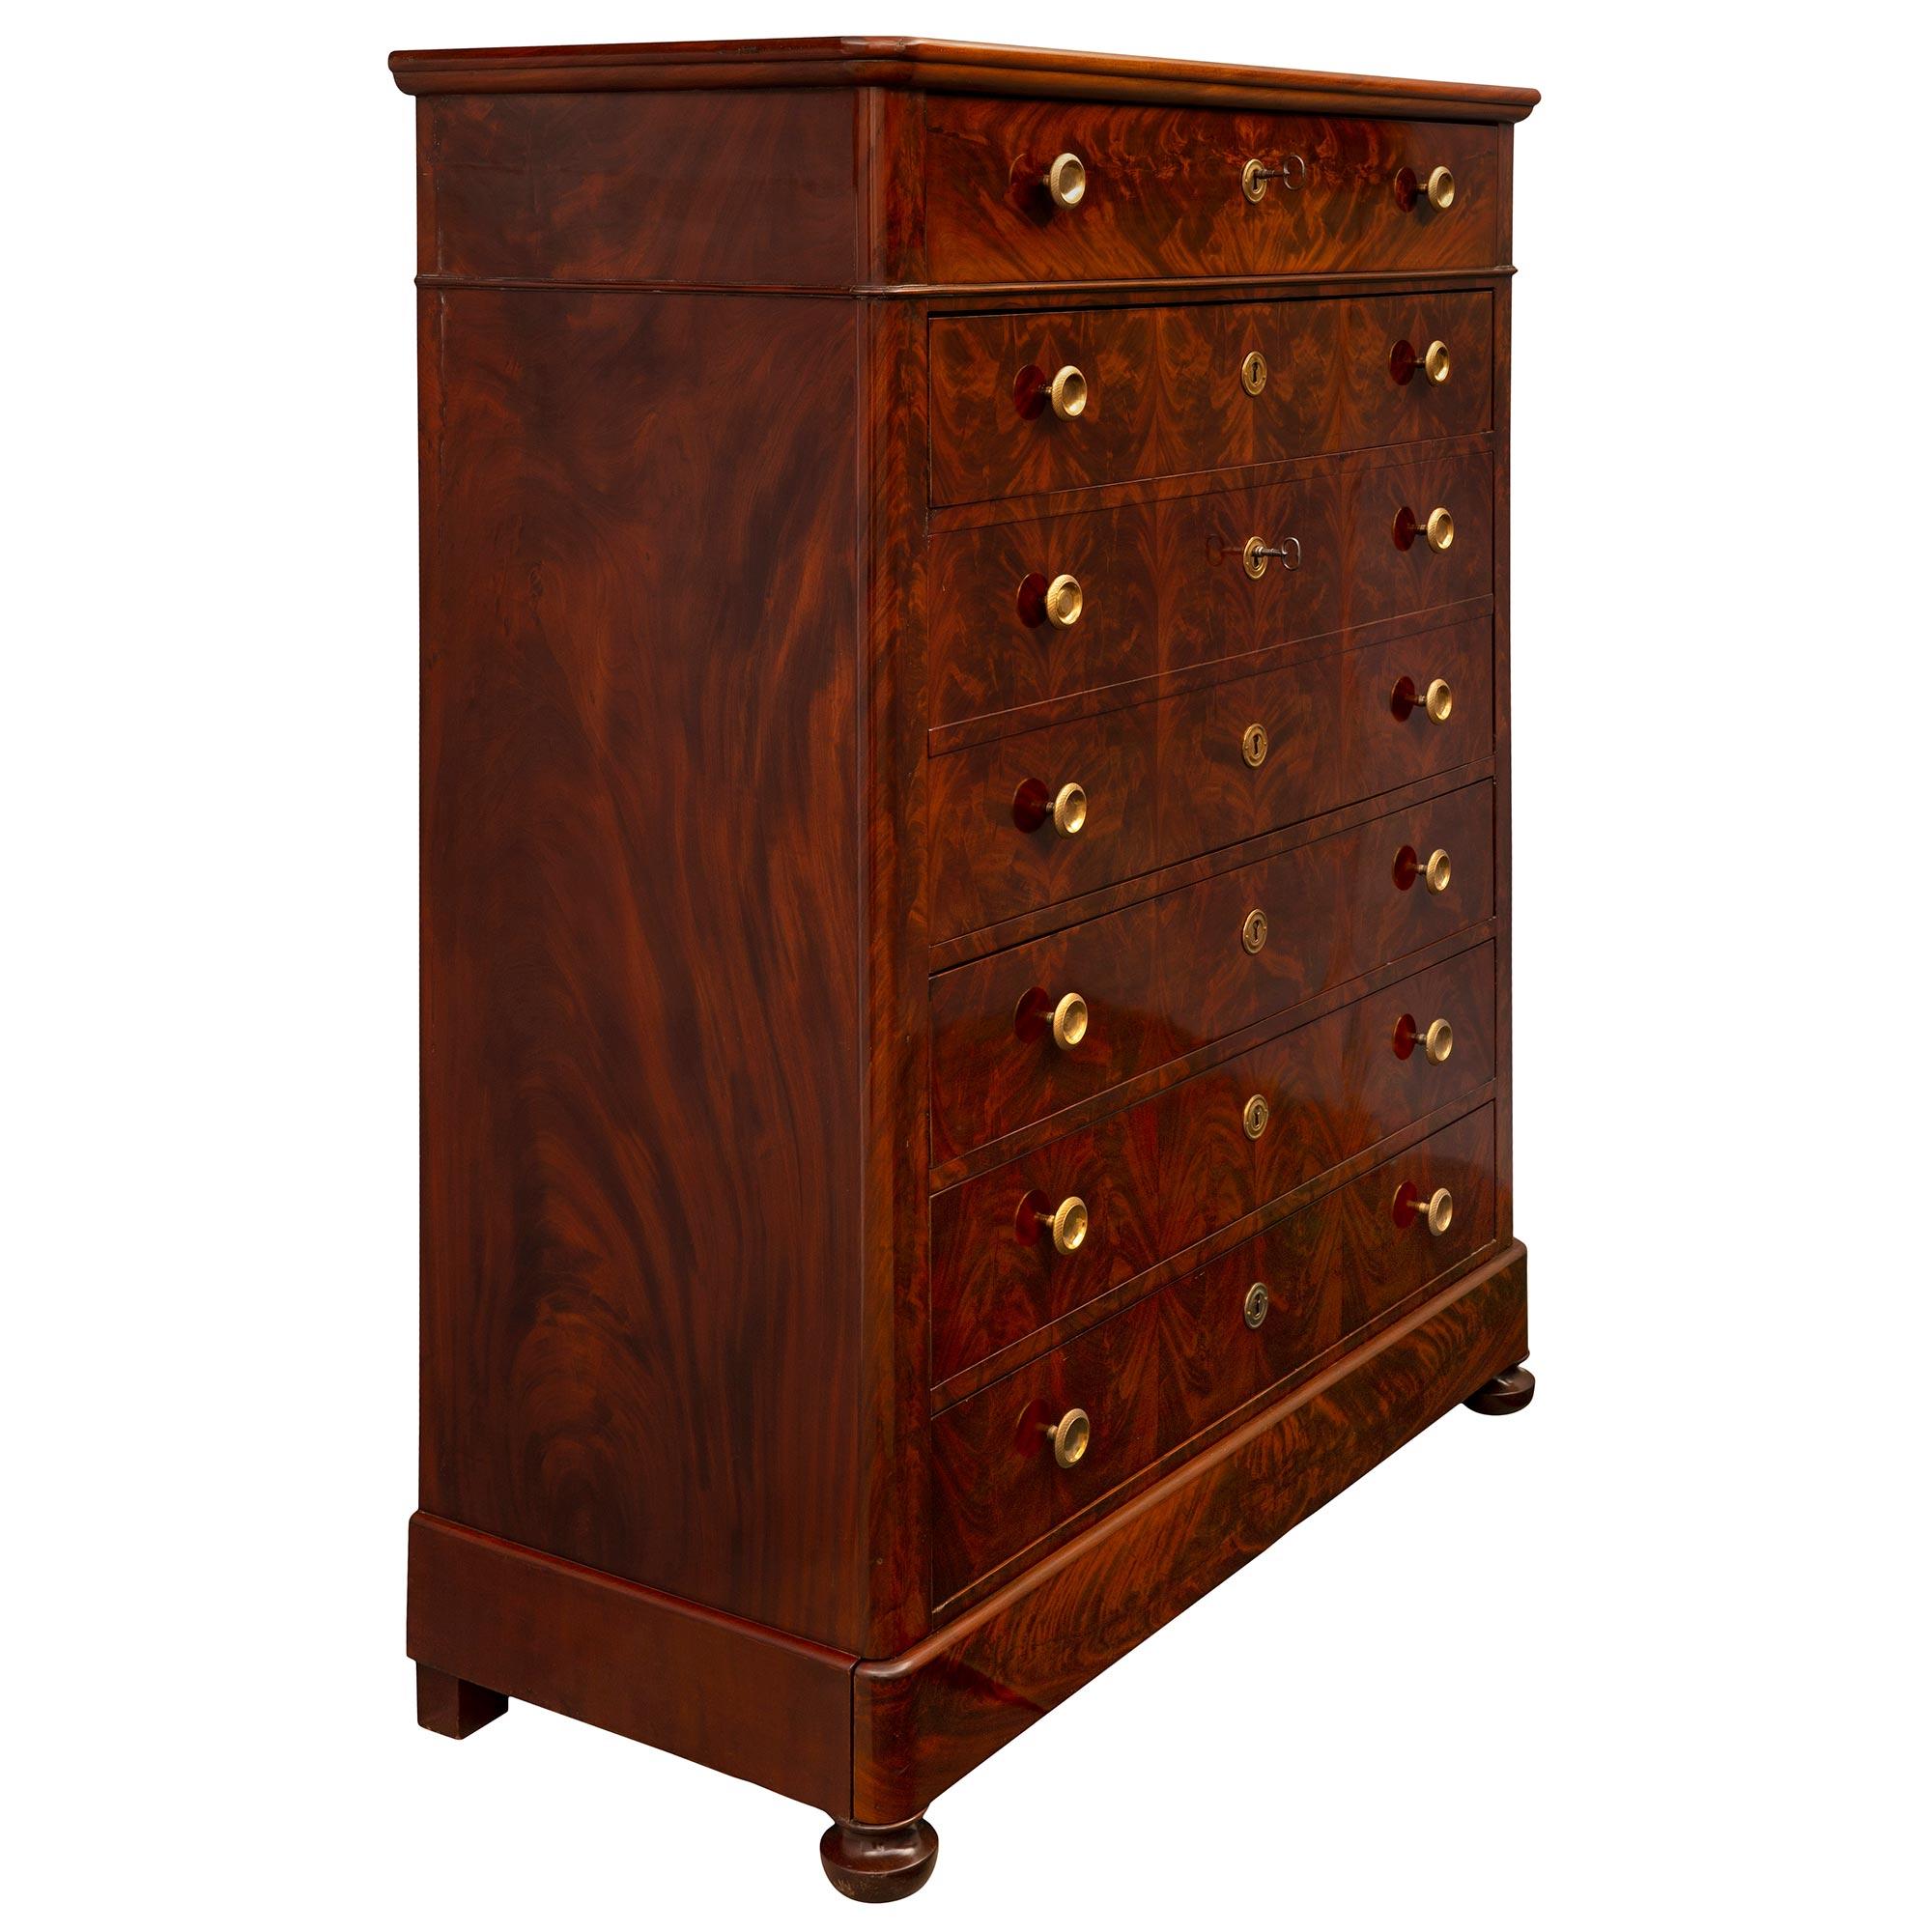 An impressive French mid-19th century Louis Philippe period flamed Mahogany and ormolu secretary circa 1840. The ten drawer secretary is raised by elegant topie shaped feet below the straight frieze which displays one concealed drawer. At the front